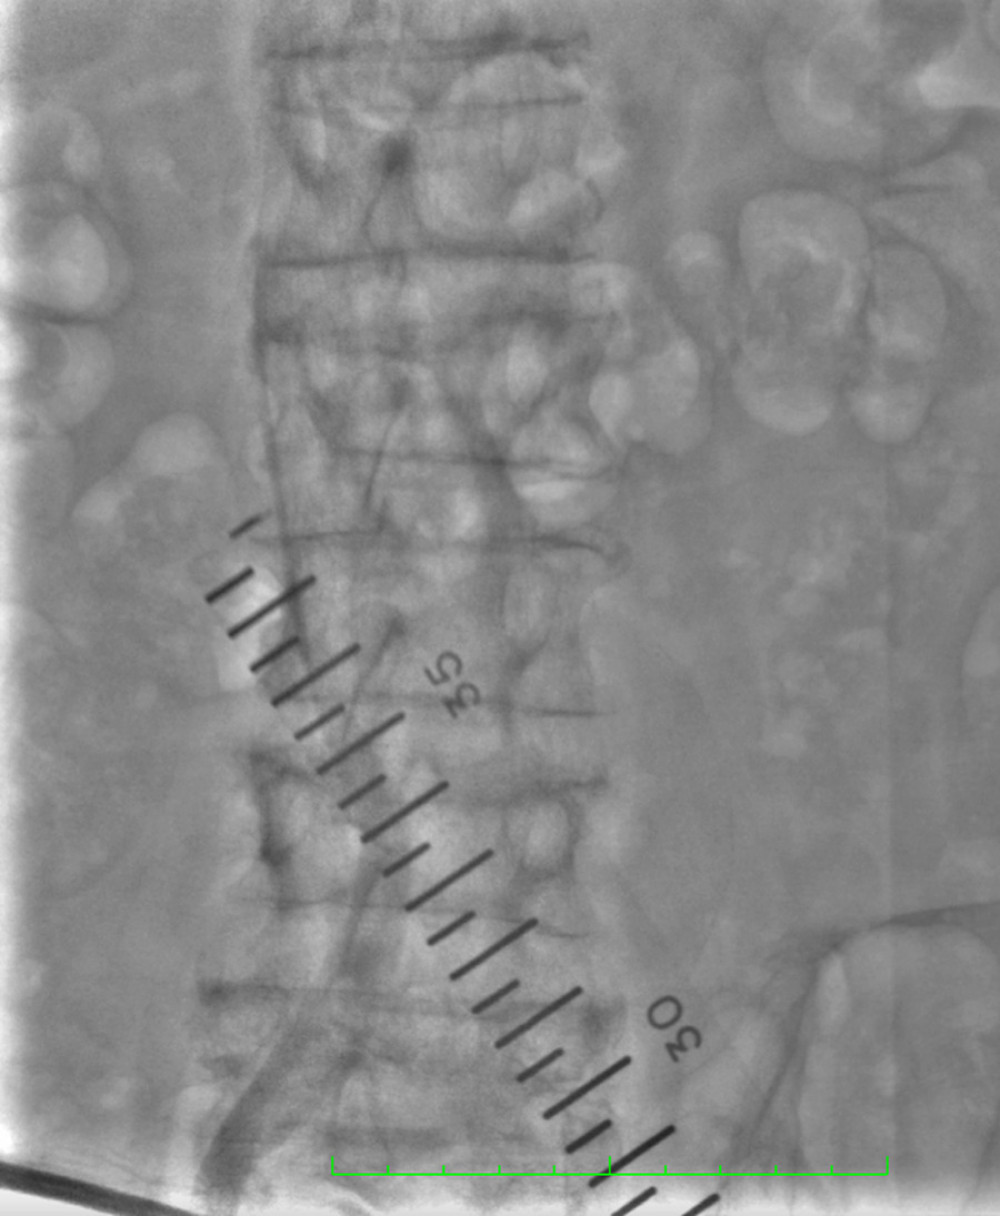 Intraoperative angiography image obtained during iliac artery endovascular recanalization to open the left iliac artery. Angiography performed via the right femoral artery before iliac artery endovascular recanalization.